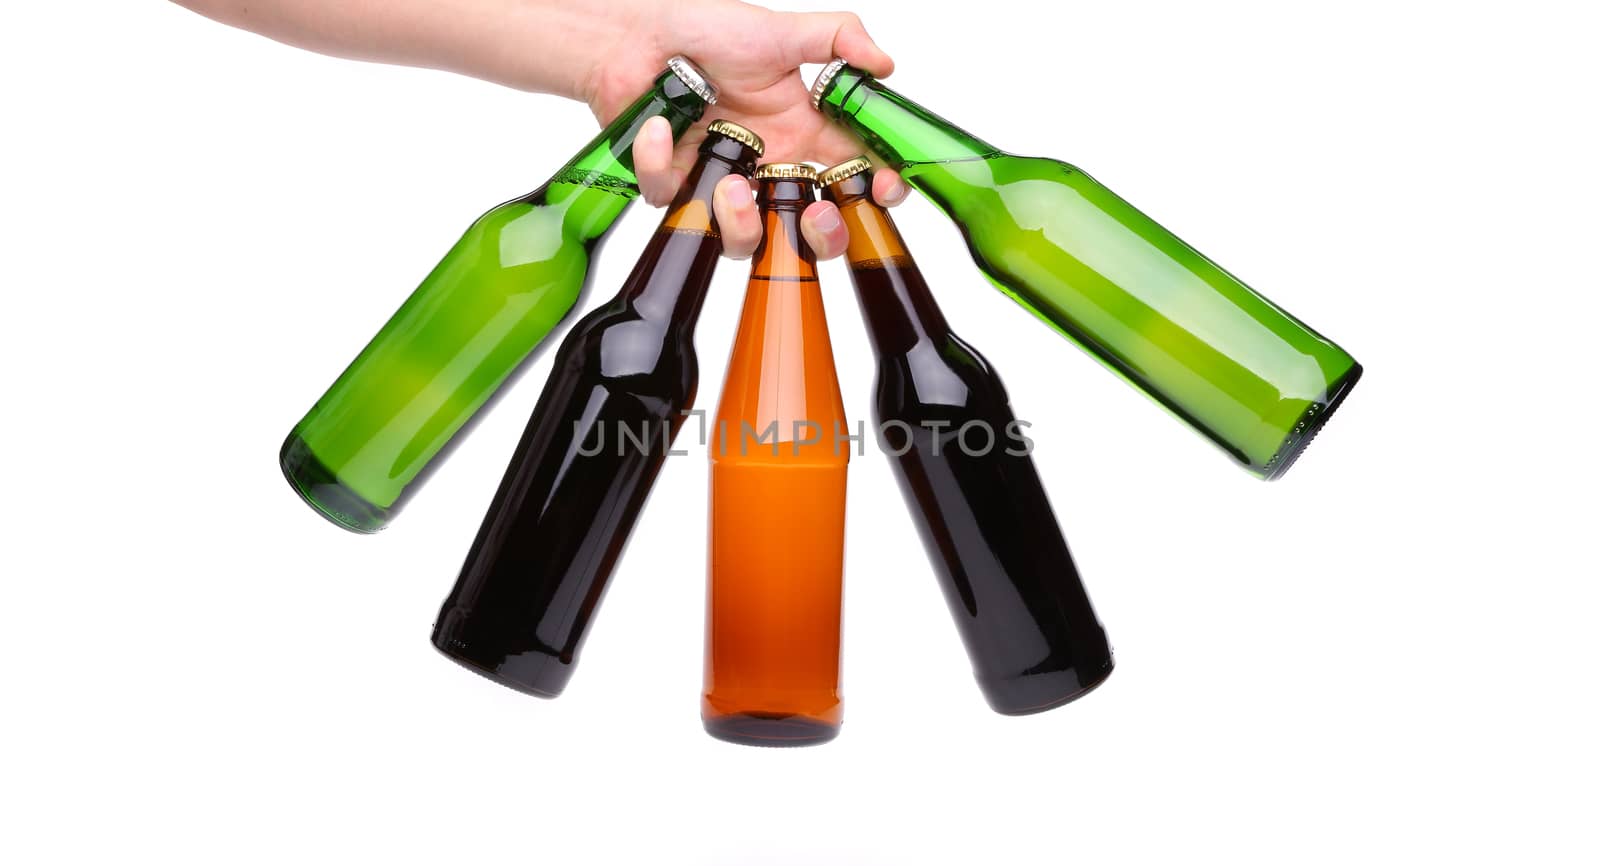 Five beer bottle hand by indigolotos